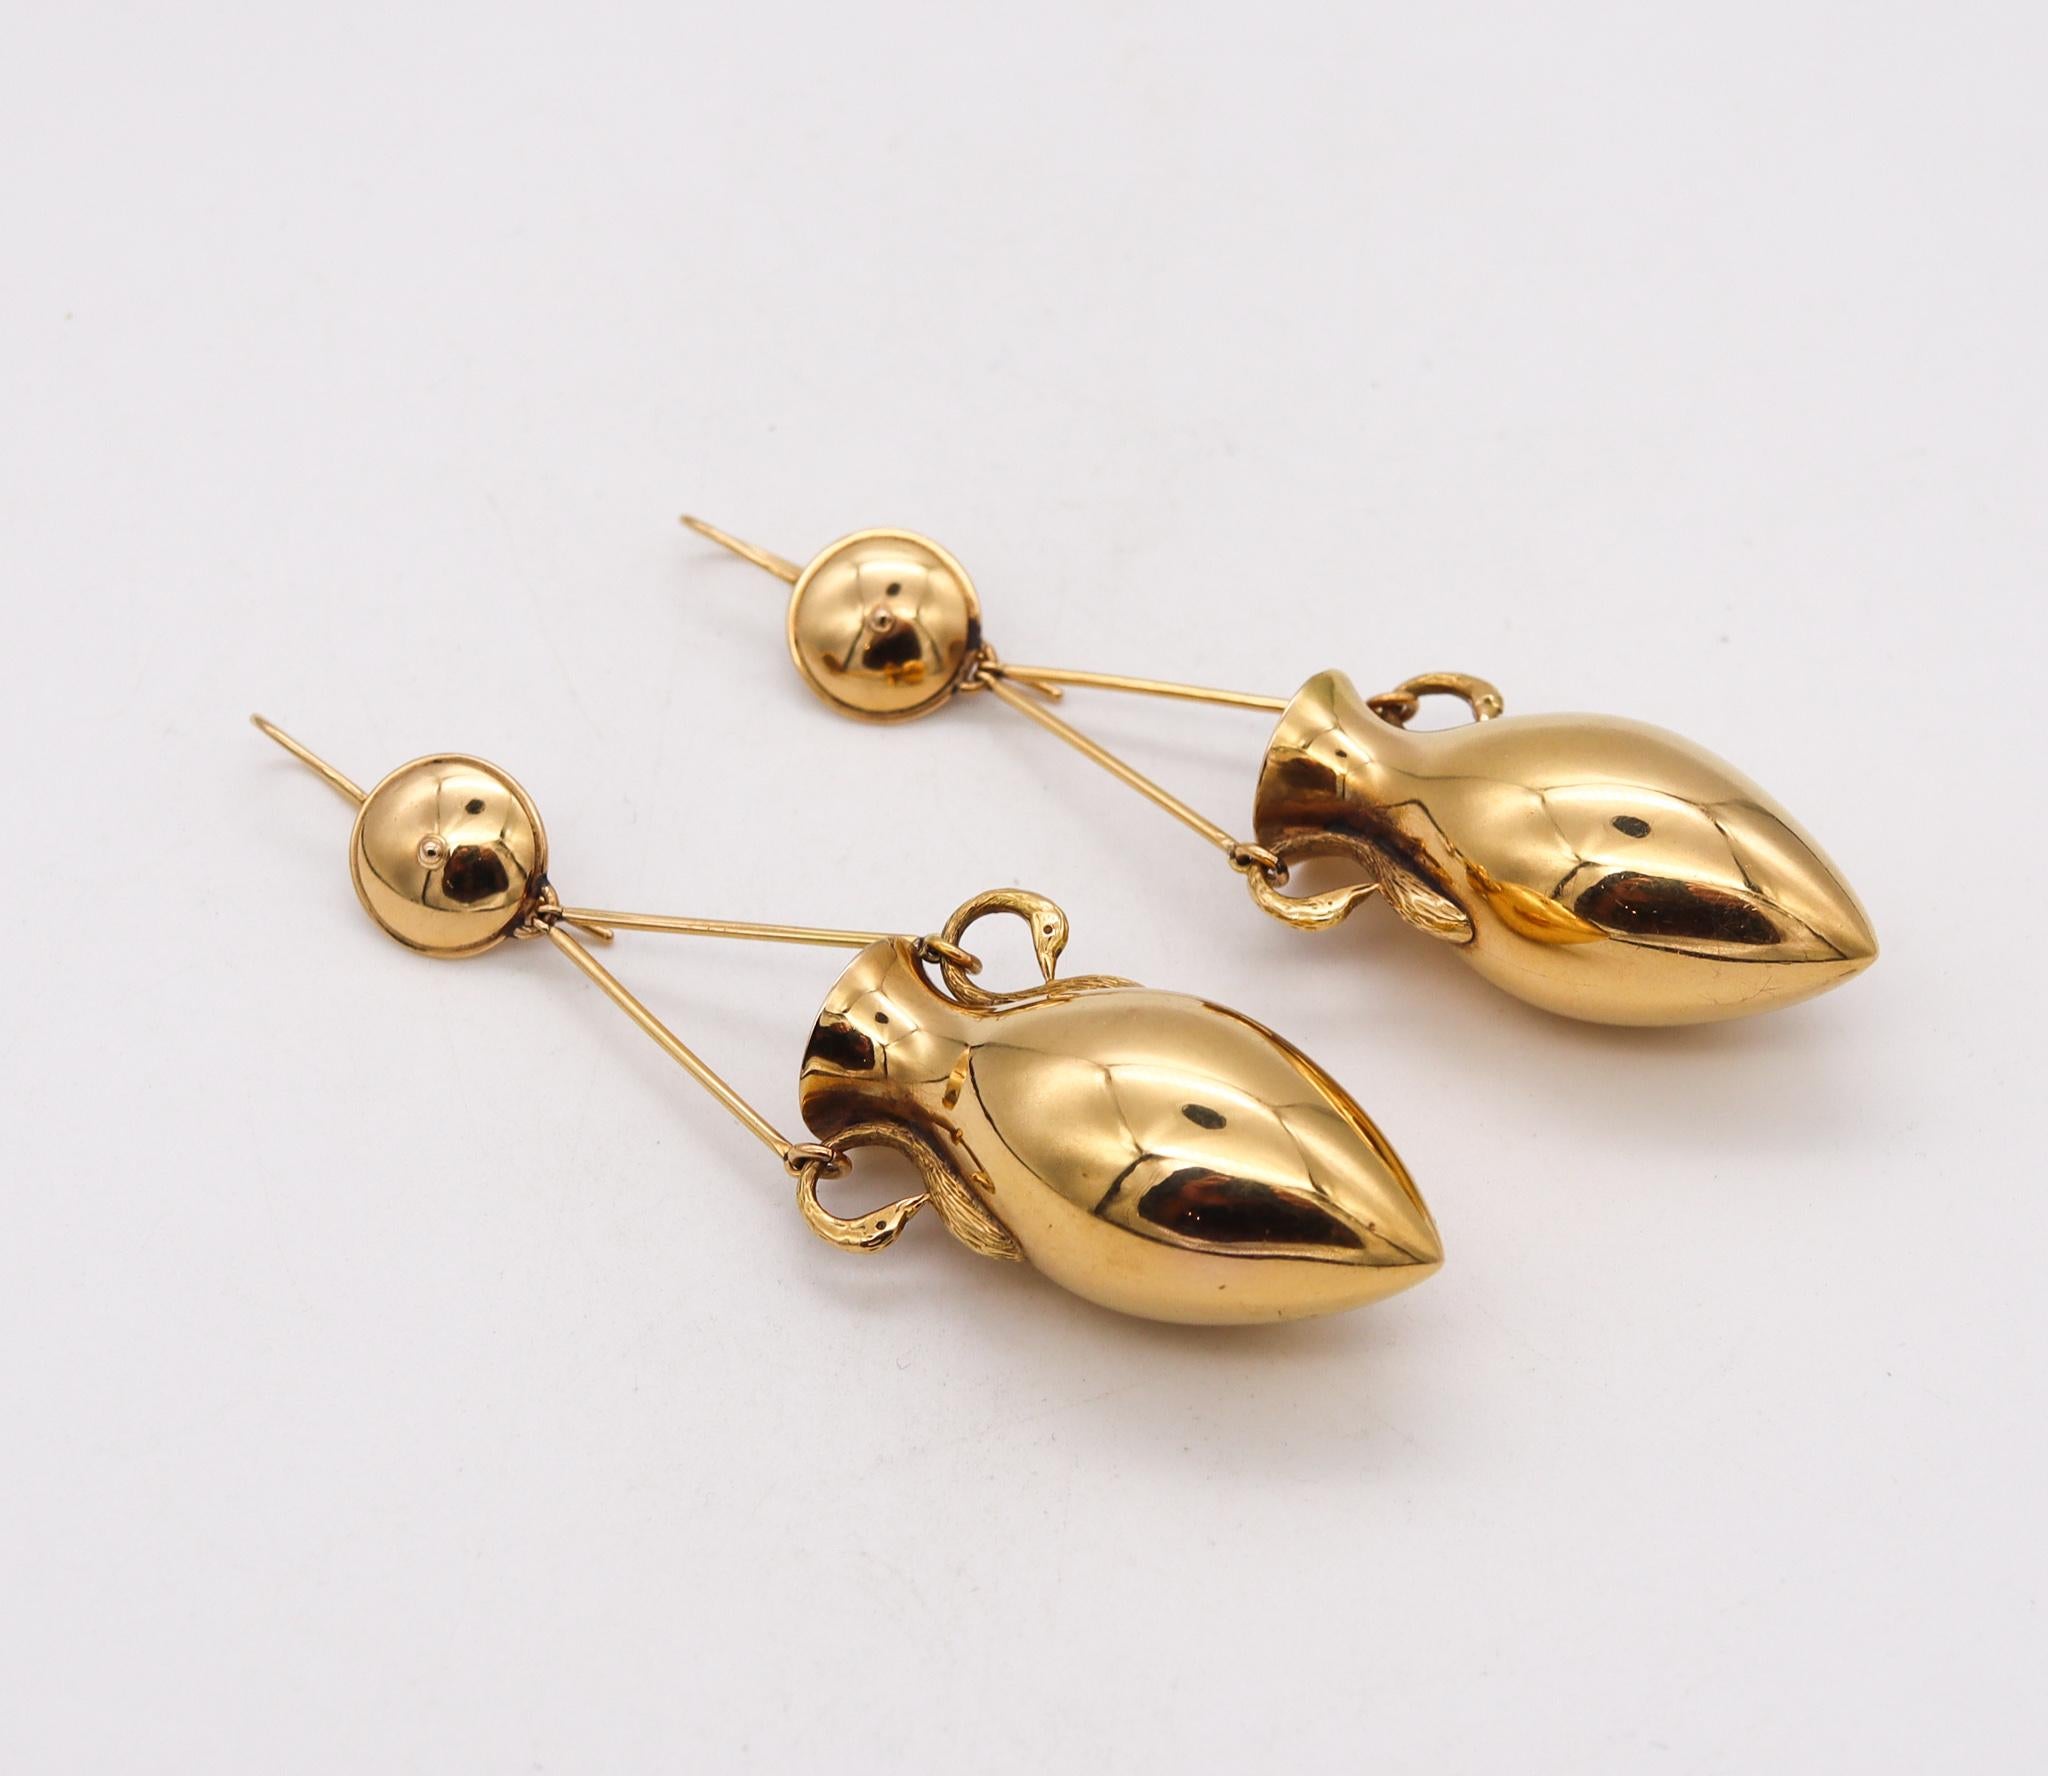 Etruscan-Roman revival ear drops pendants.

Magnificent oversized drop earrings, from the Victorian Era (1837-1901) circa 1880. These beautiful pair has been crafted with etruscan-roman revival patterns in solid yellow gold of 18 karats, with high